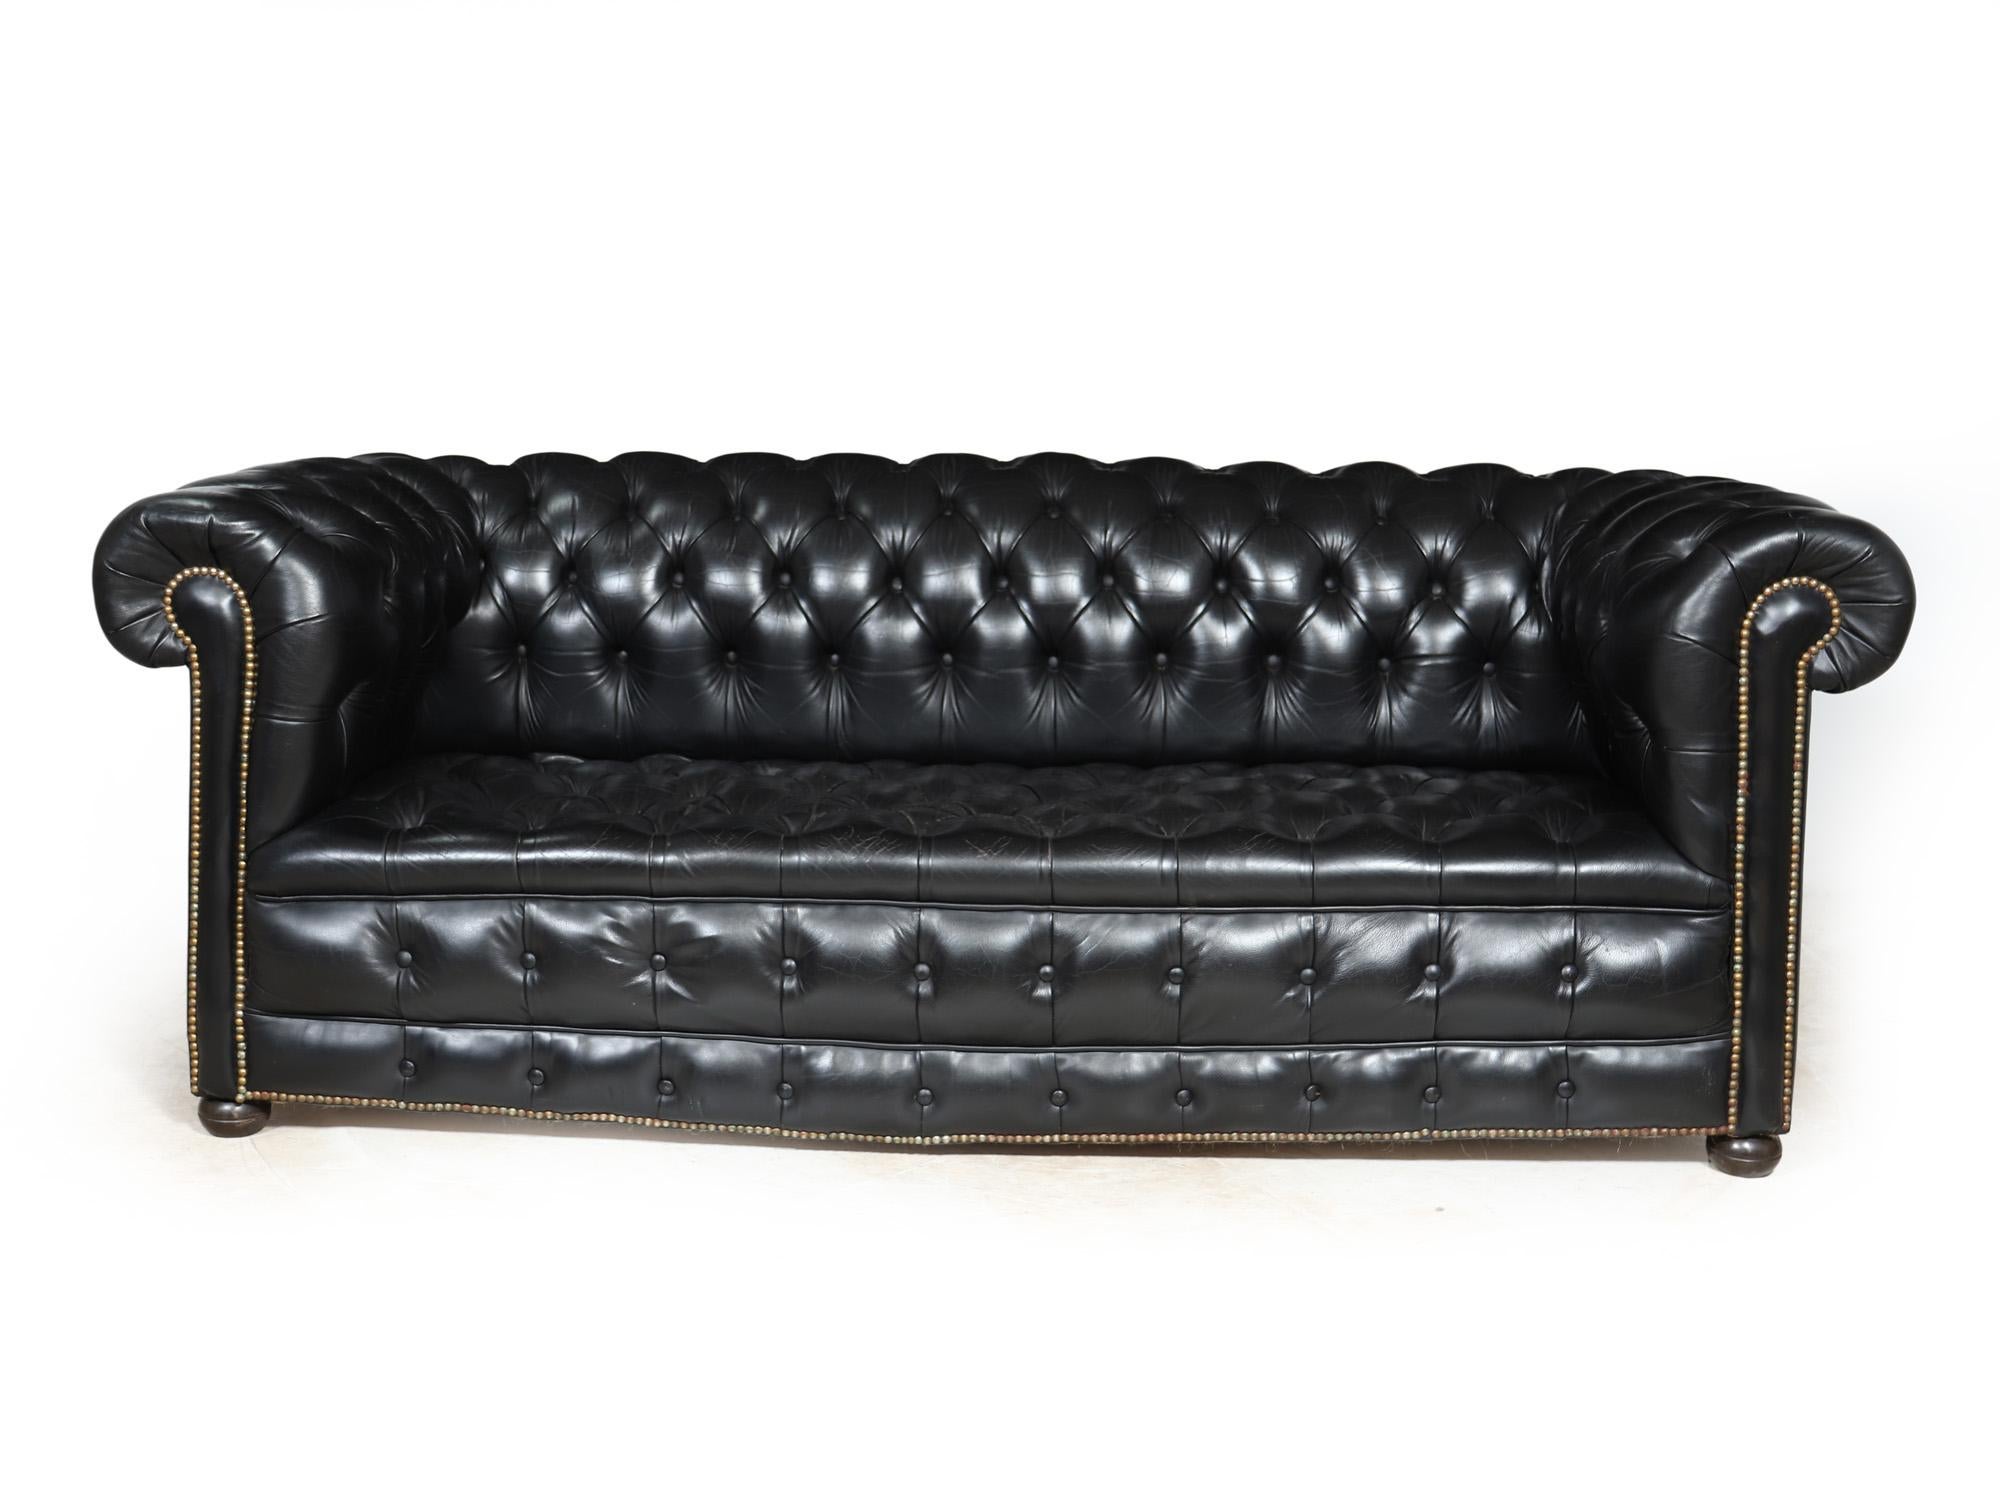 Vintage Black leather Chesterfield Sofa

A lovely example of a mid 20th century deep buttoned thick black leather chesterfield sofa, this chesterfield sofa has a buttoned seat and back making this more desirable than those with cushions, this sofa